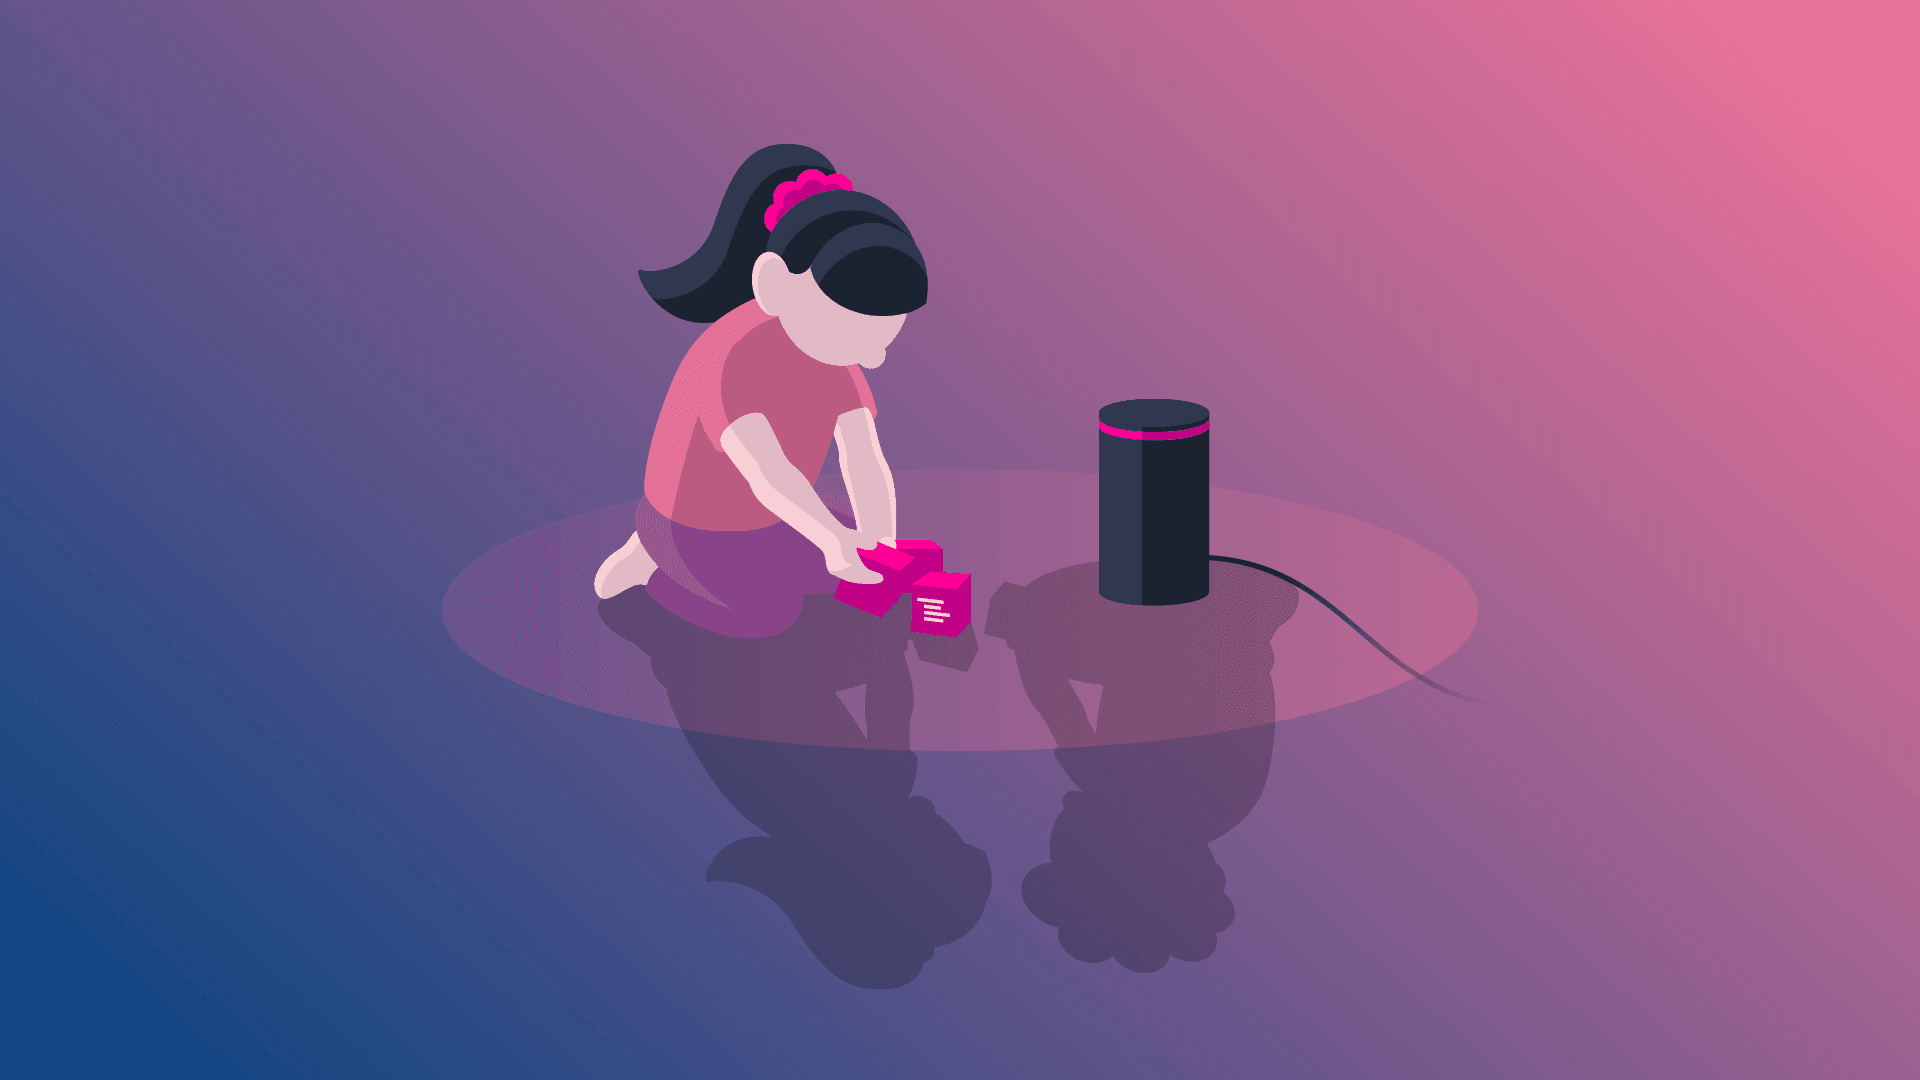 Illustration of child playing with Alexa